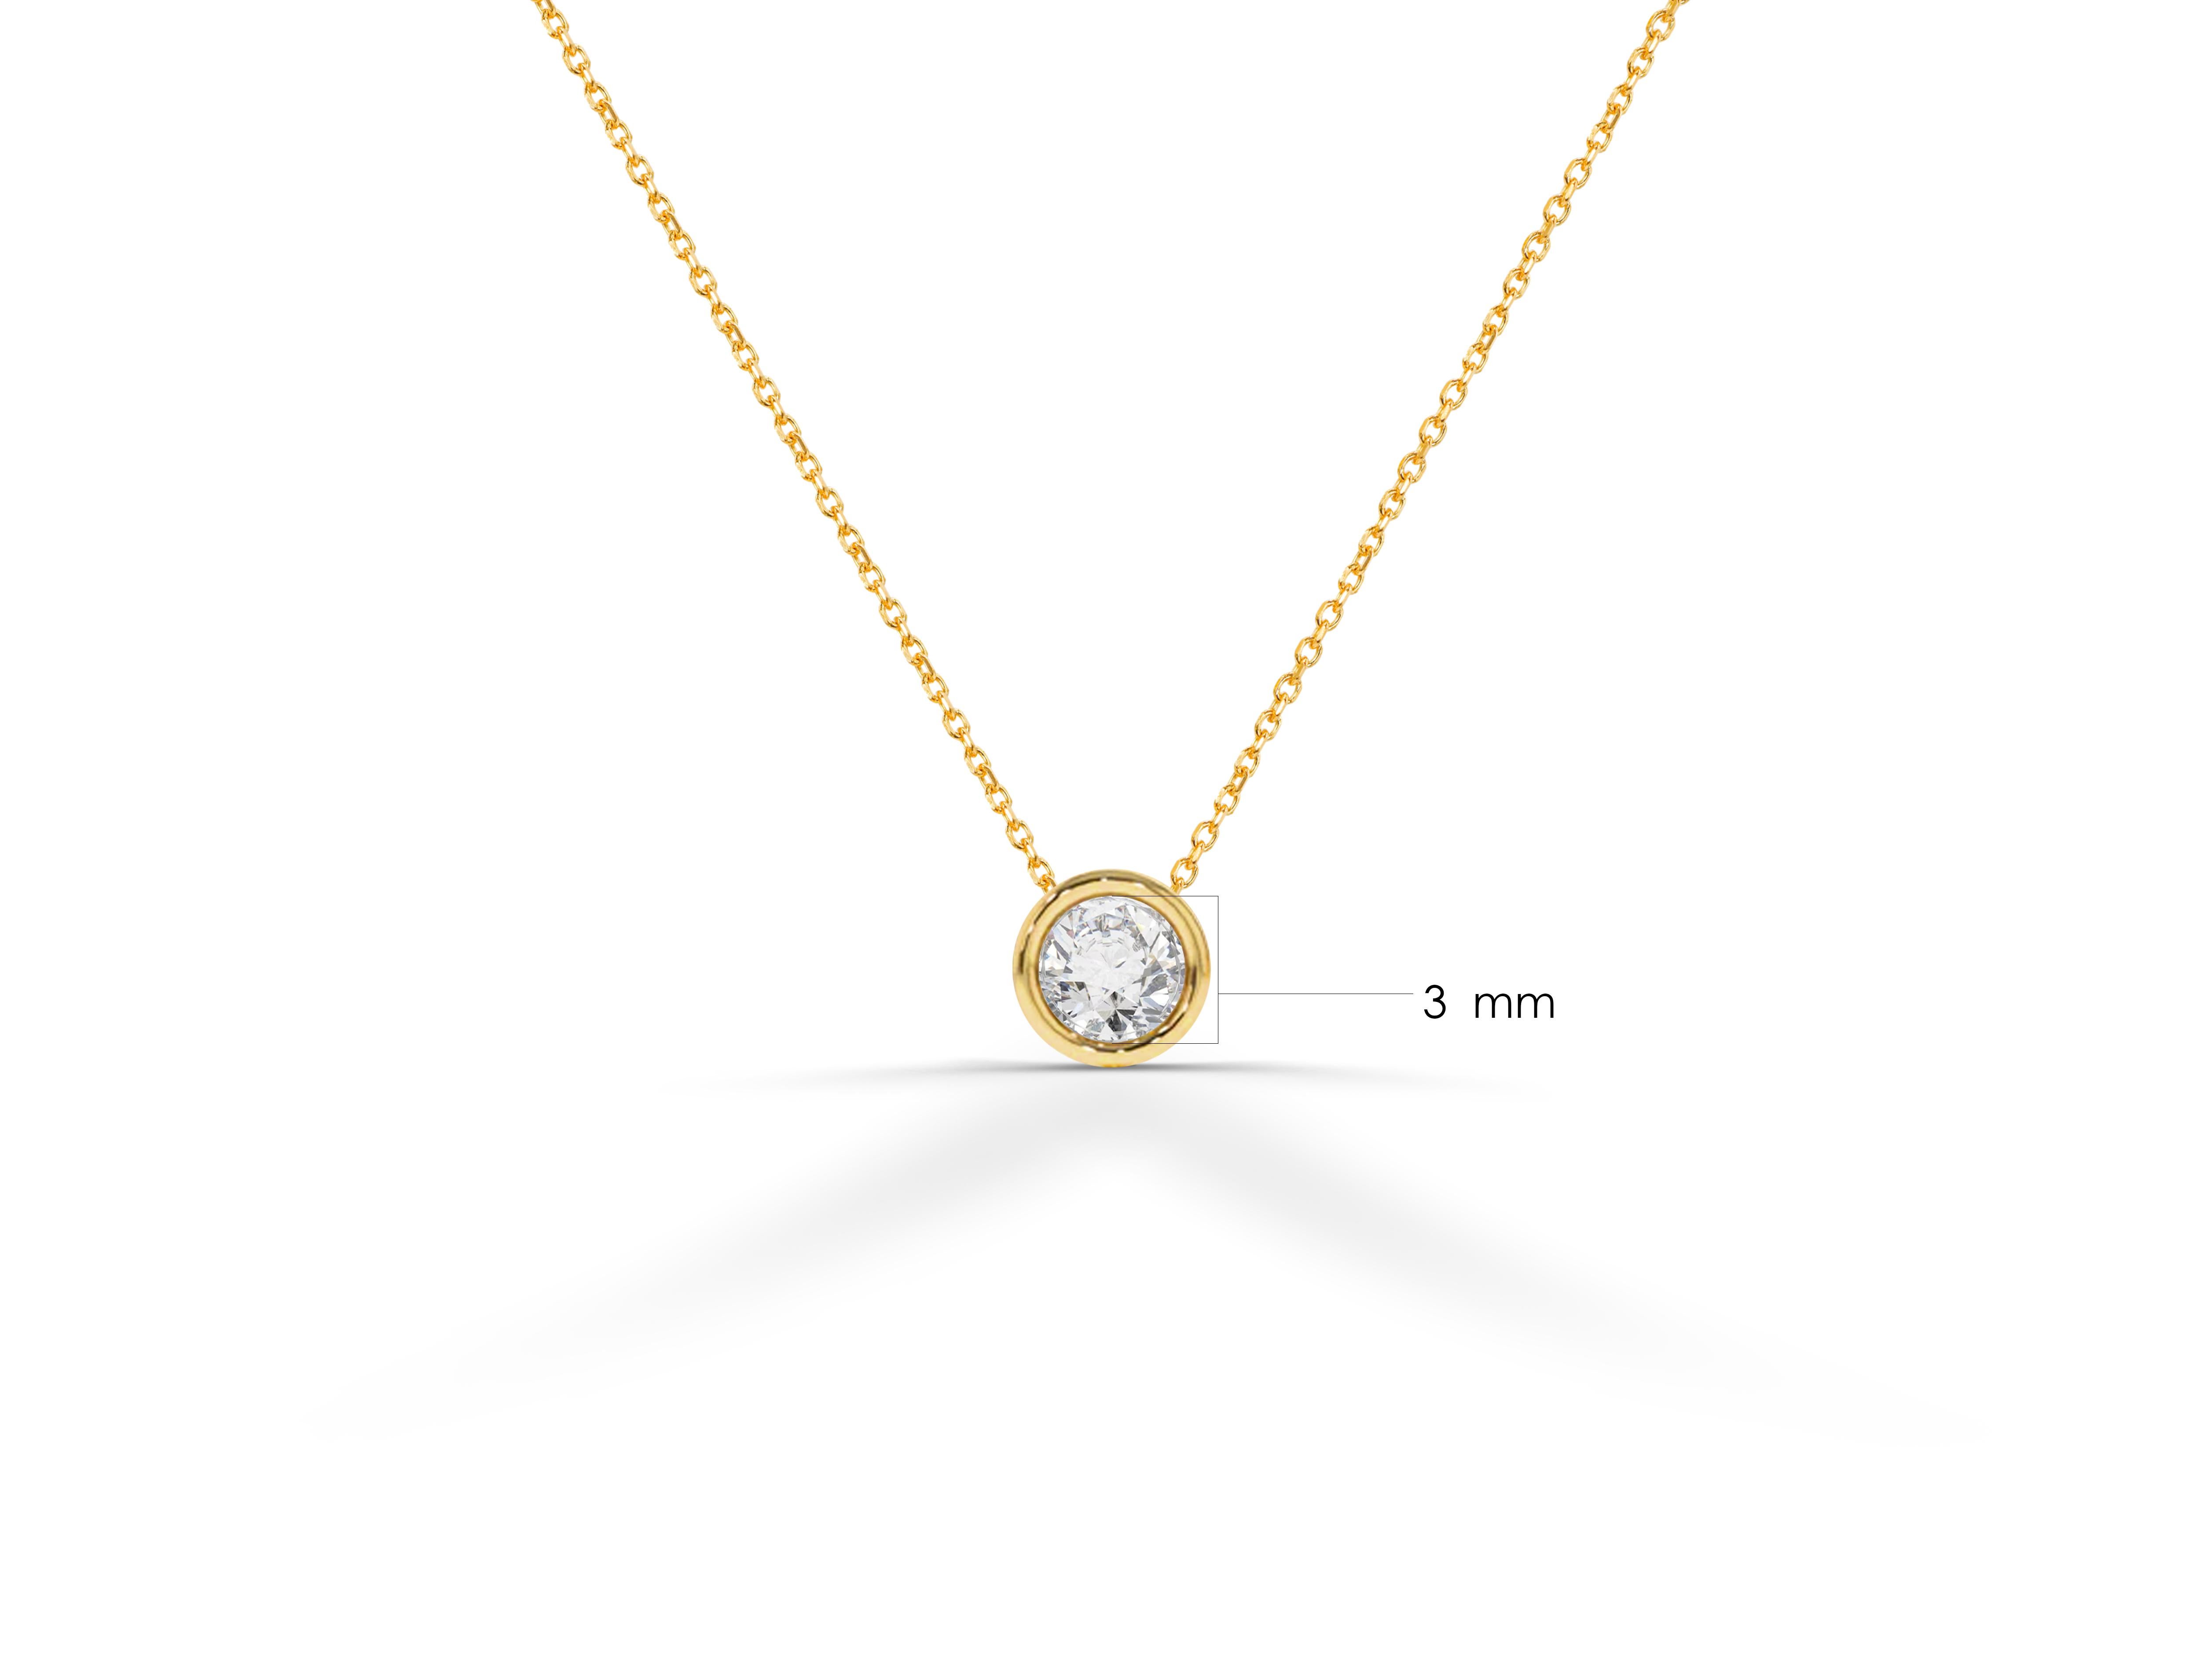 Brilliant White Sparkly Natural Diamond Necklace is made of 14k solid gold available in three colors, White Gold / Rose Gold / Yellow Gold.

Natural Diamond hanging in center of a thin dainty gold chain a perfect choice for everyday wear. It would